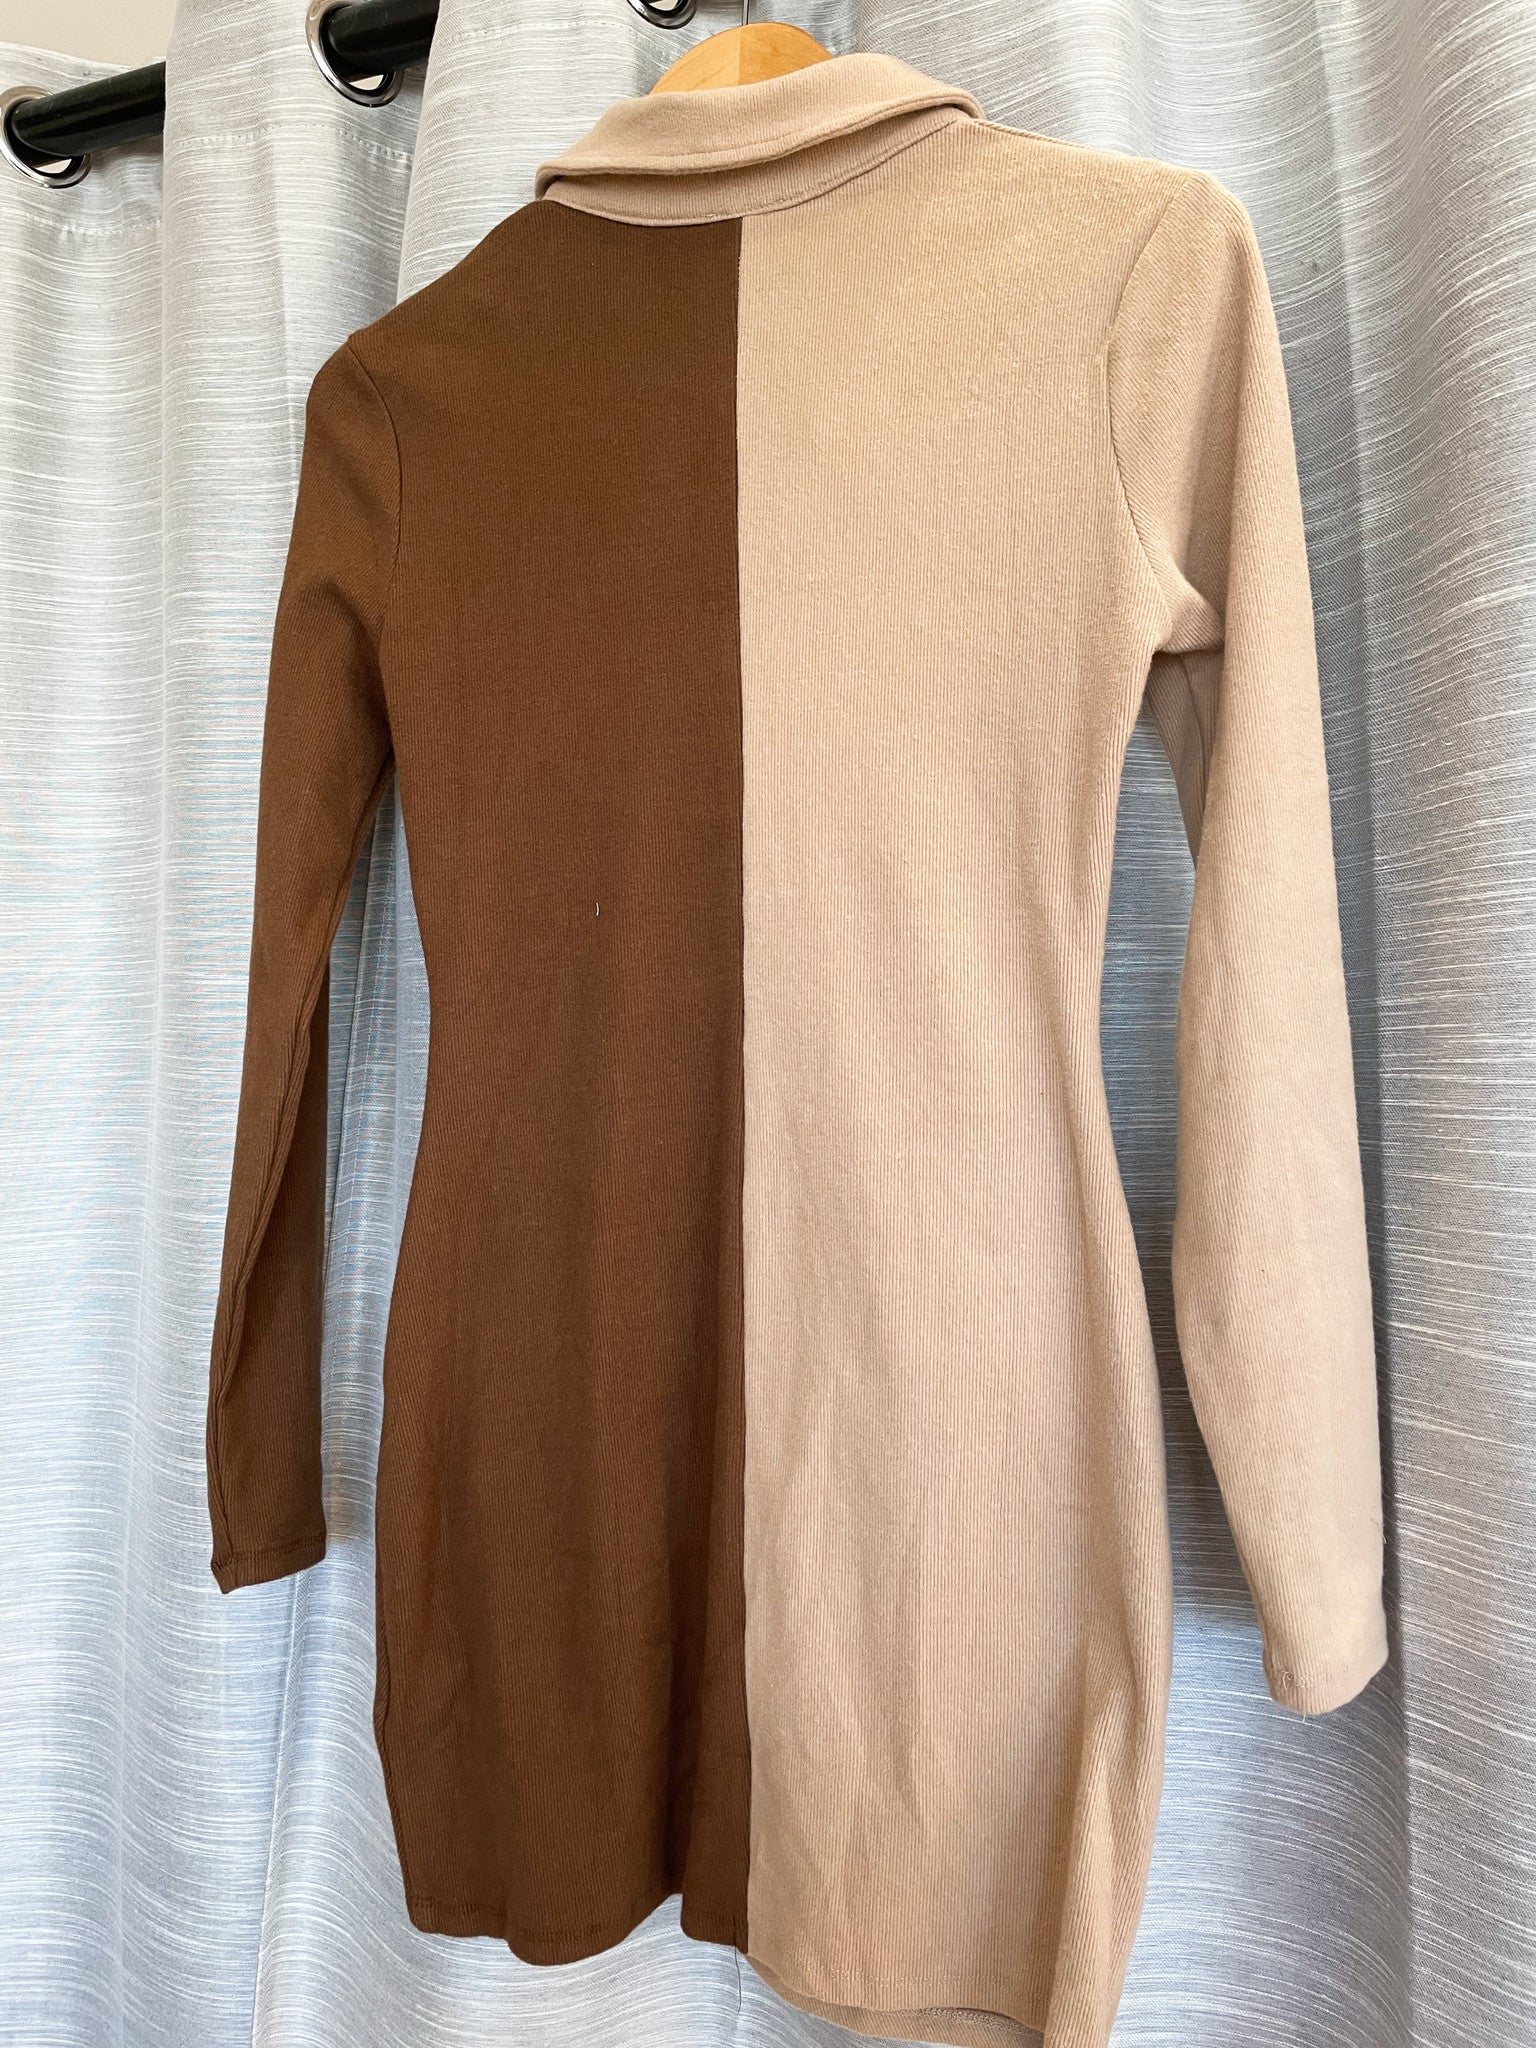 Taupe/Brown Color Block Button Down Dress